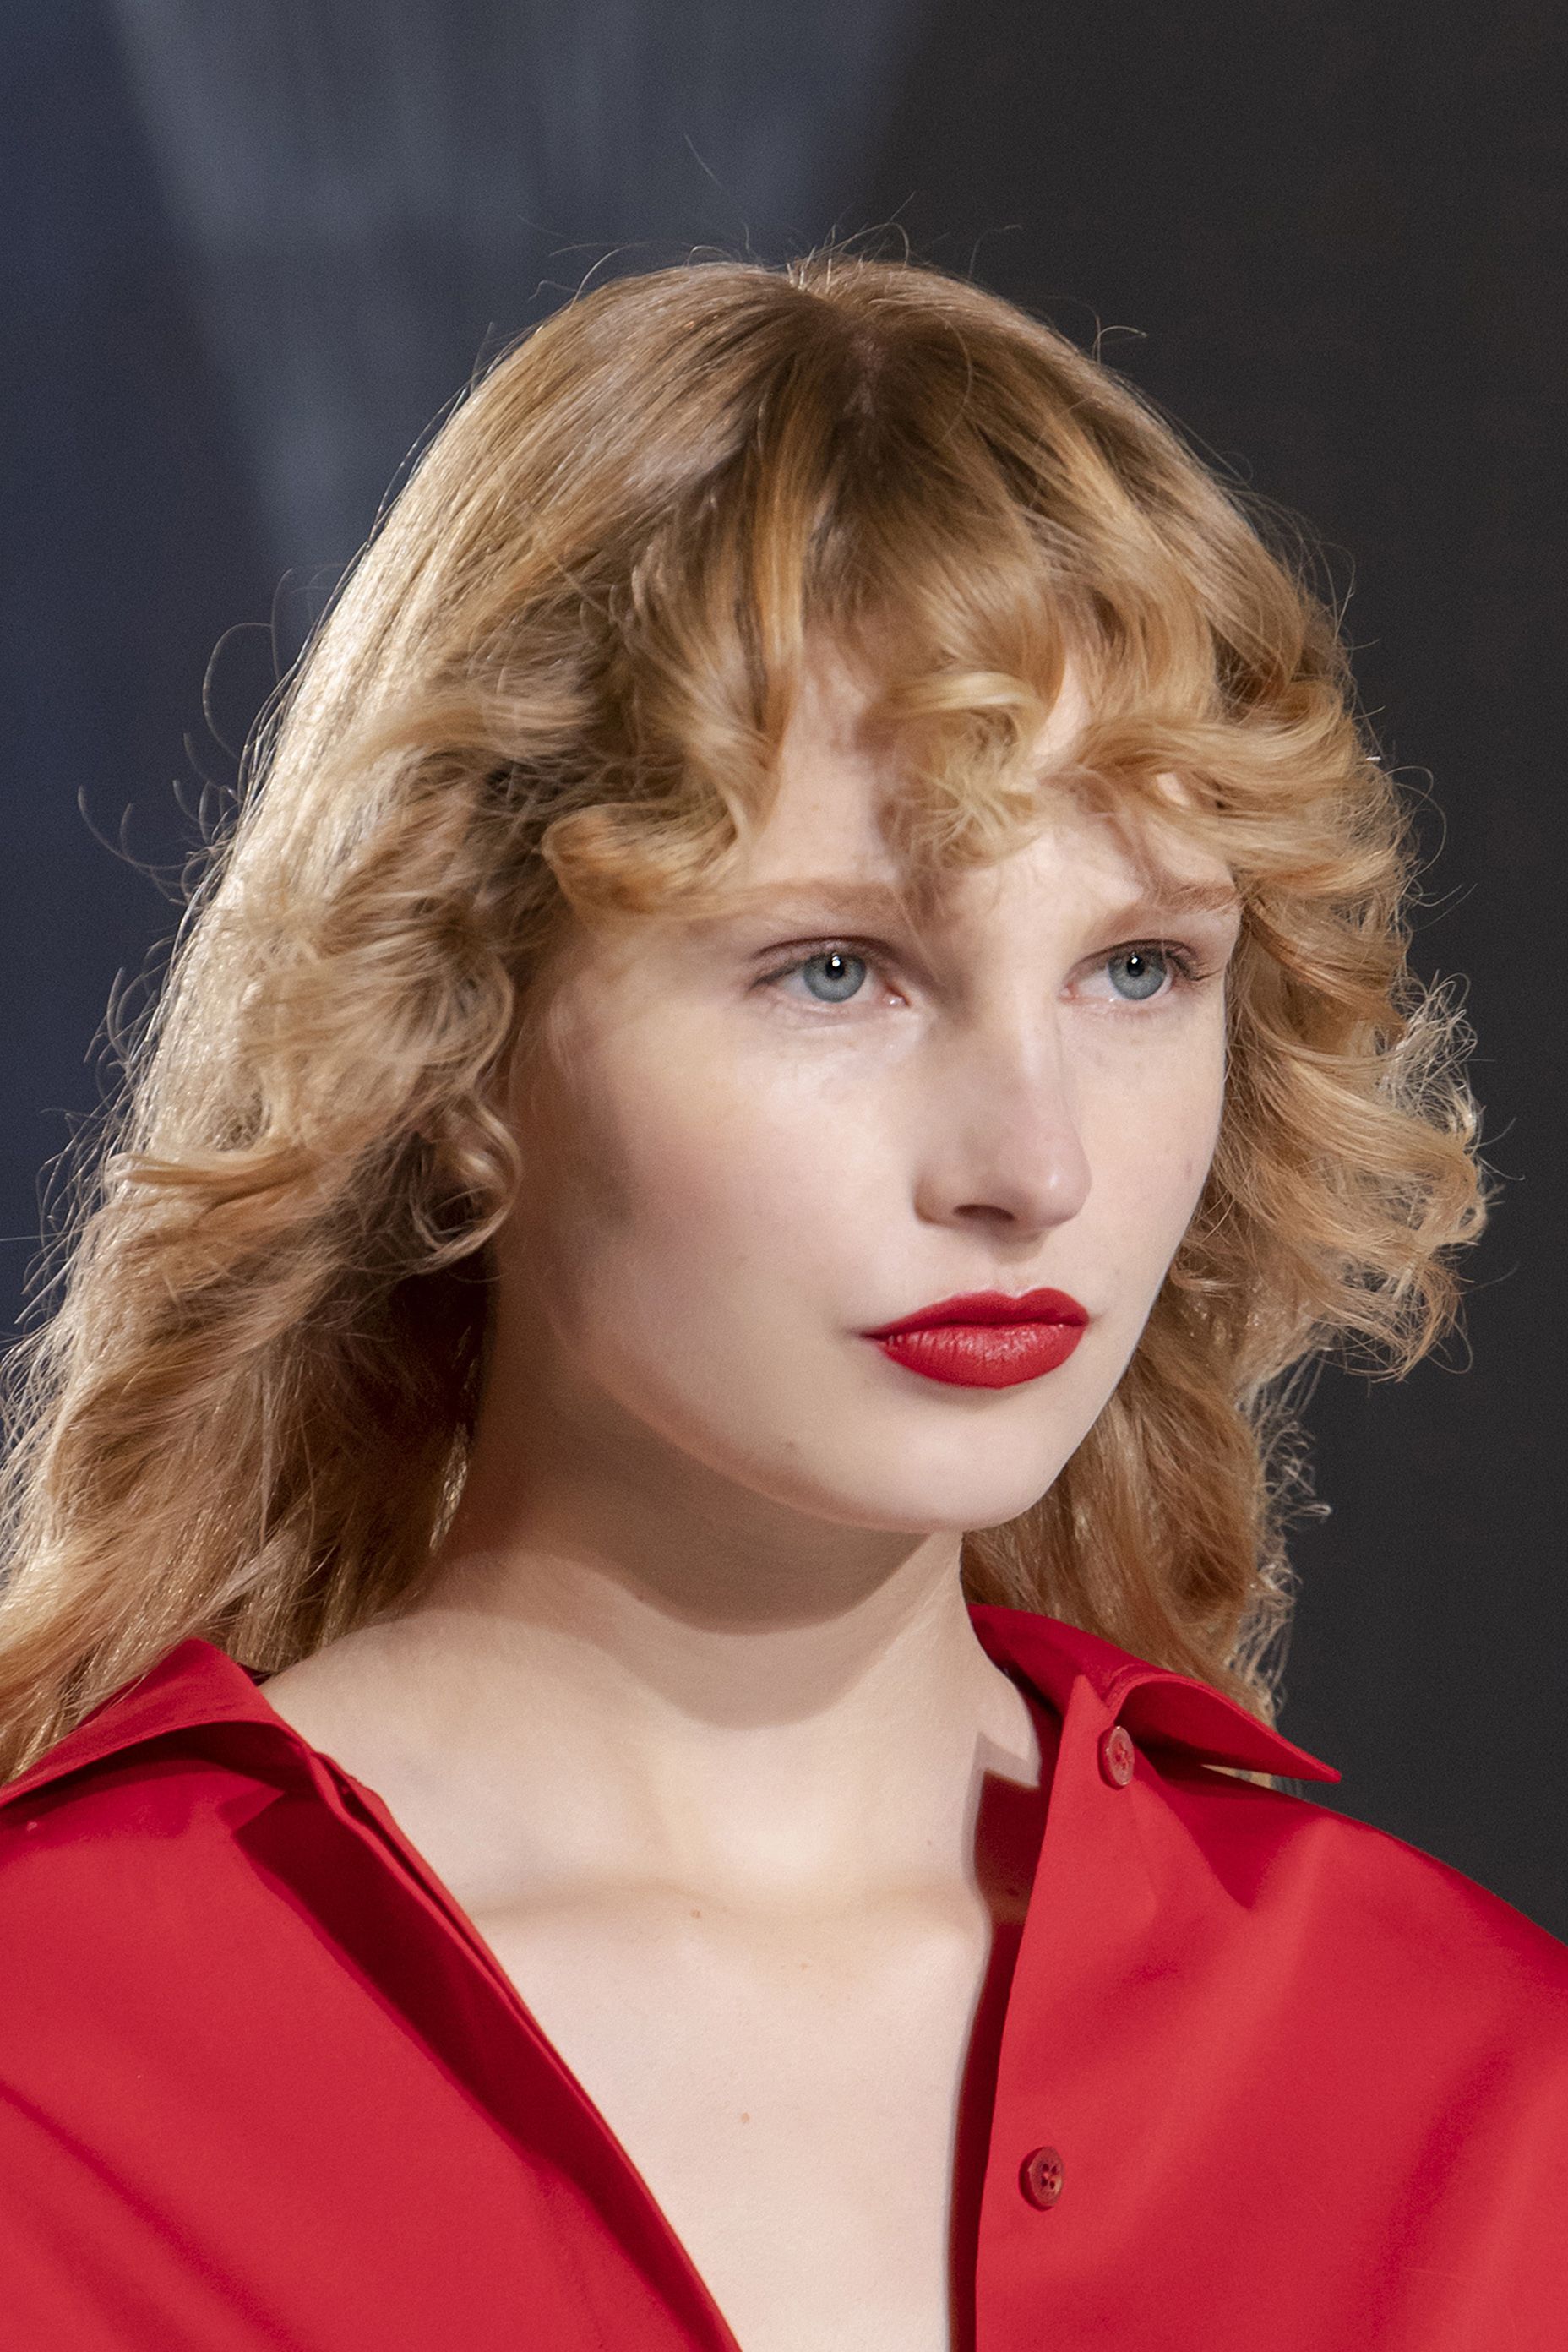 1970s Waves Are Back And Bigger Than Ever - Here's How To Master